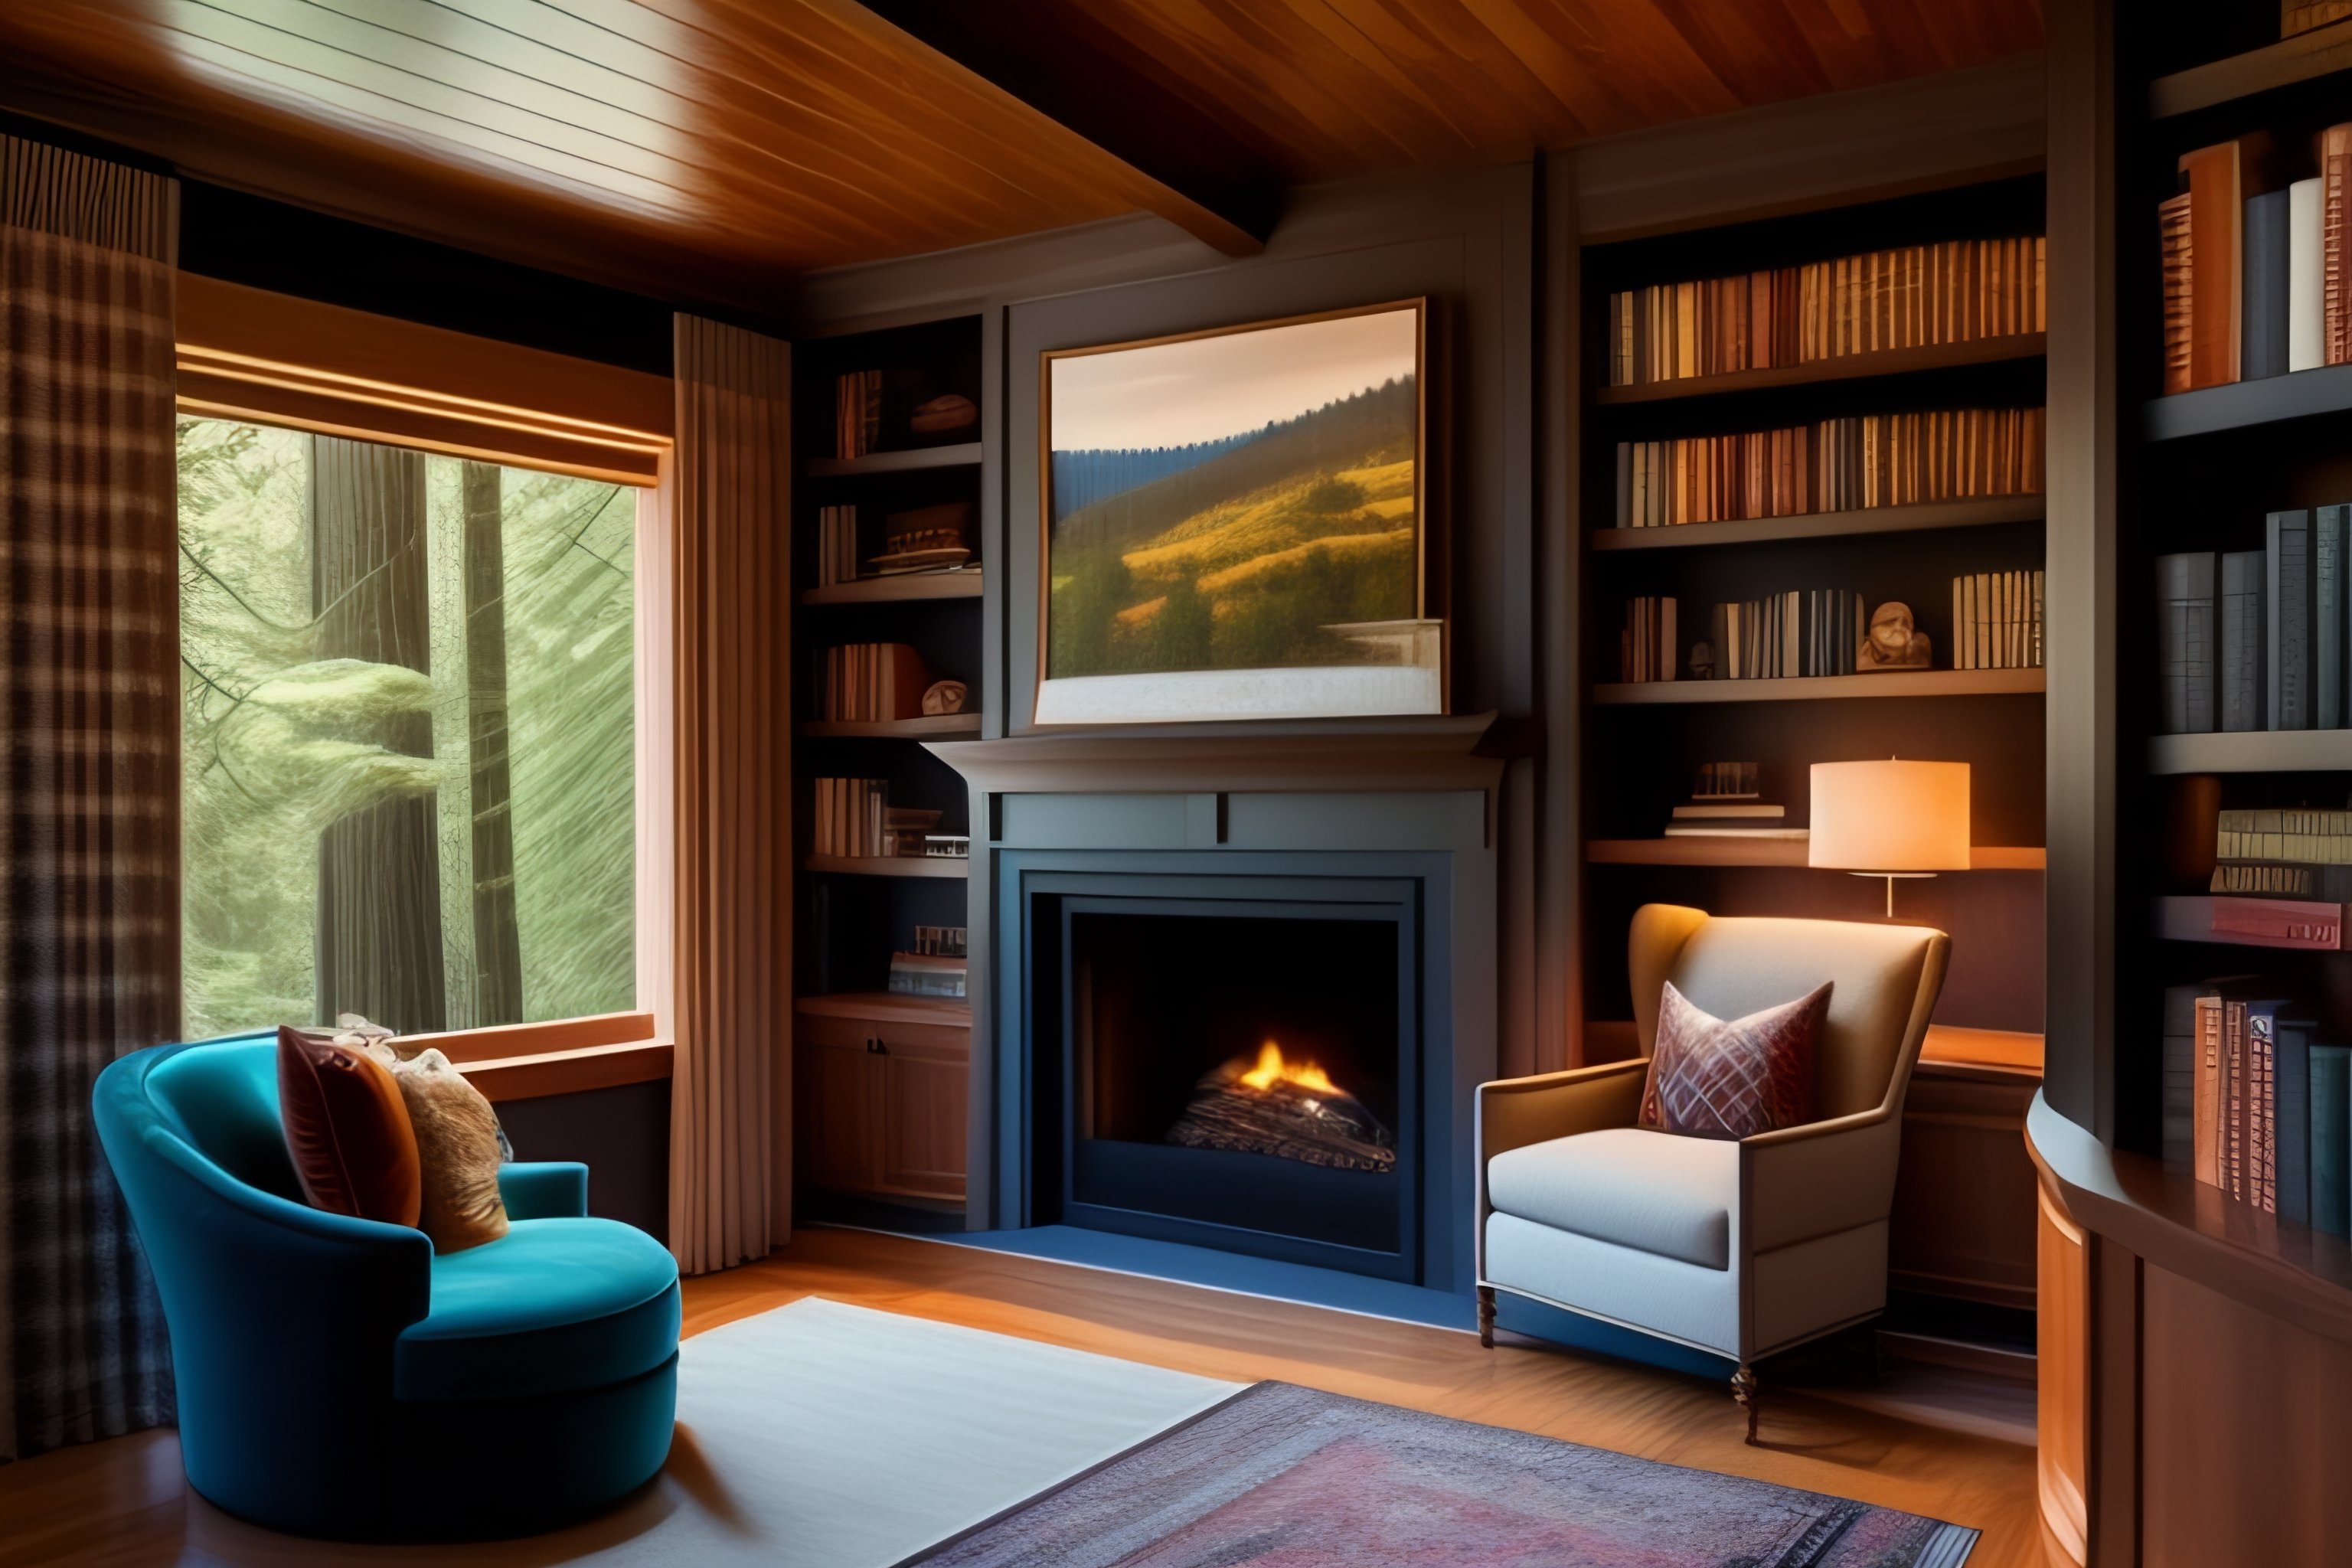 Lexica - Reading nook with bookshelves and fireplace overlooking ...